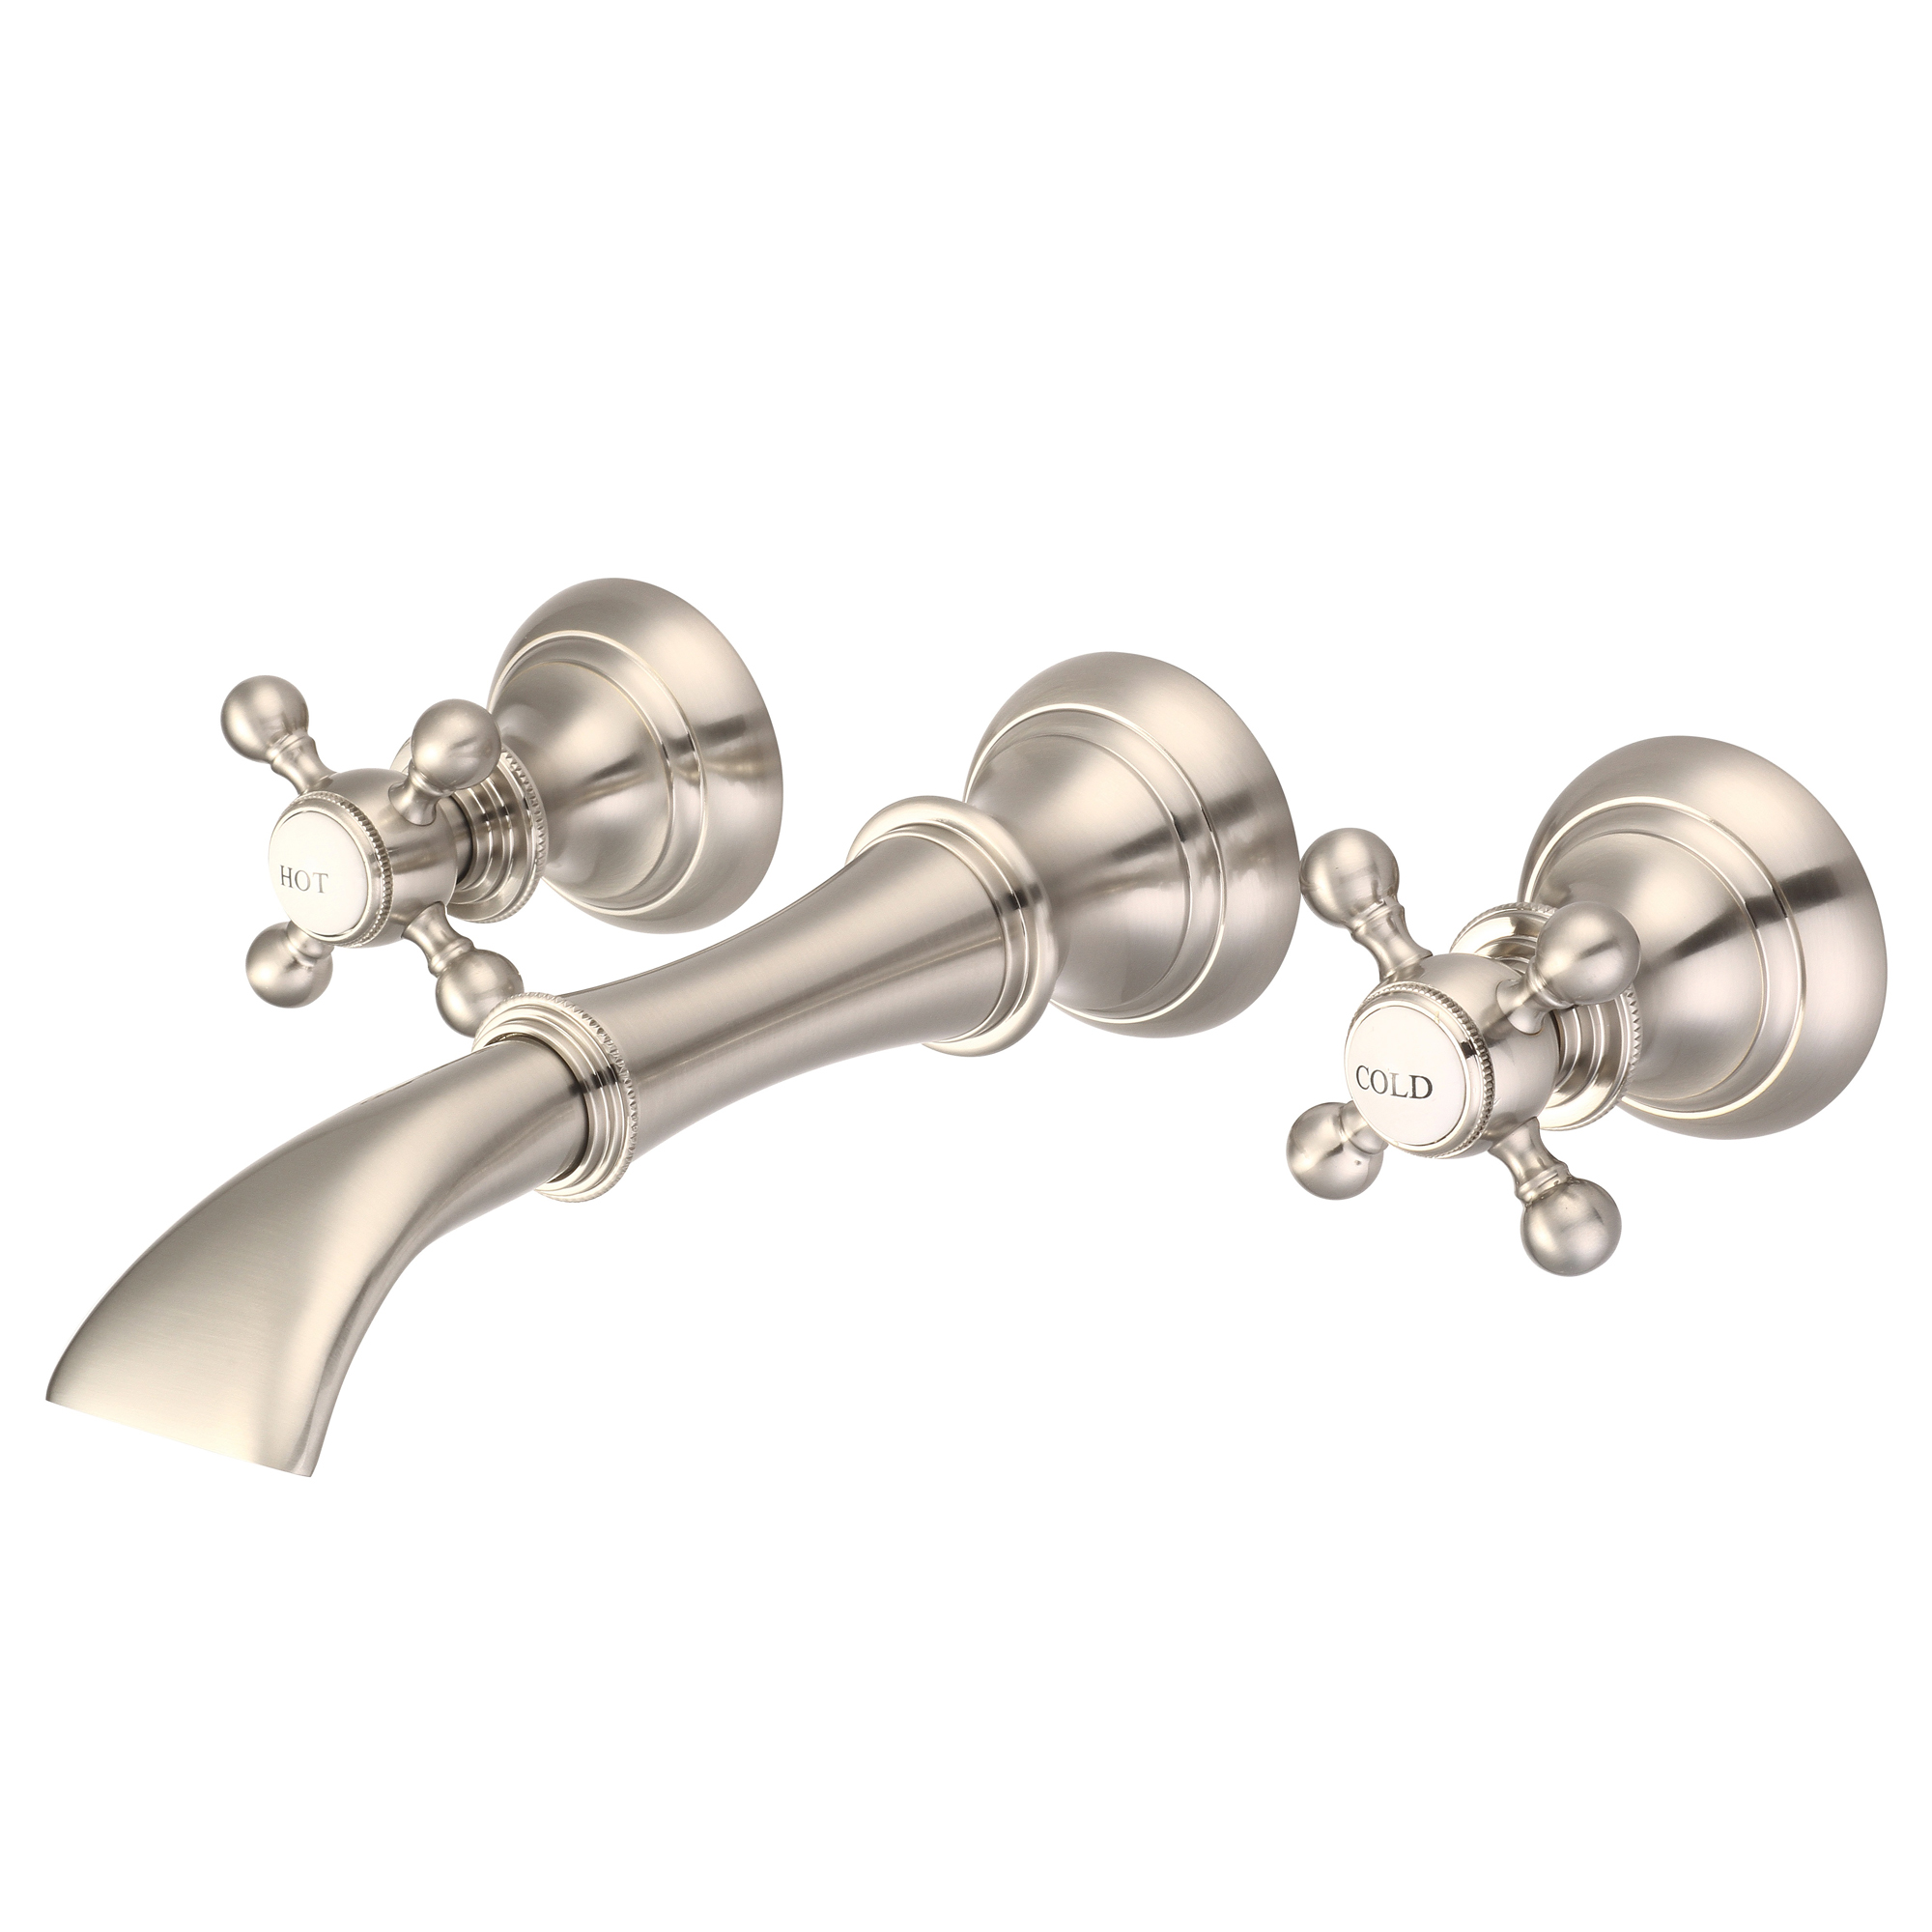 Waterfall Style Wall-mounted Lavatory Faucet in Brushed Nickel Finish